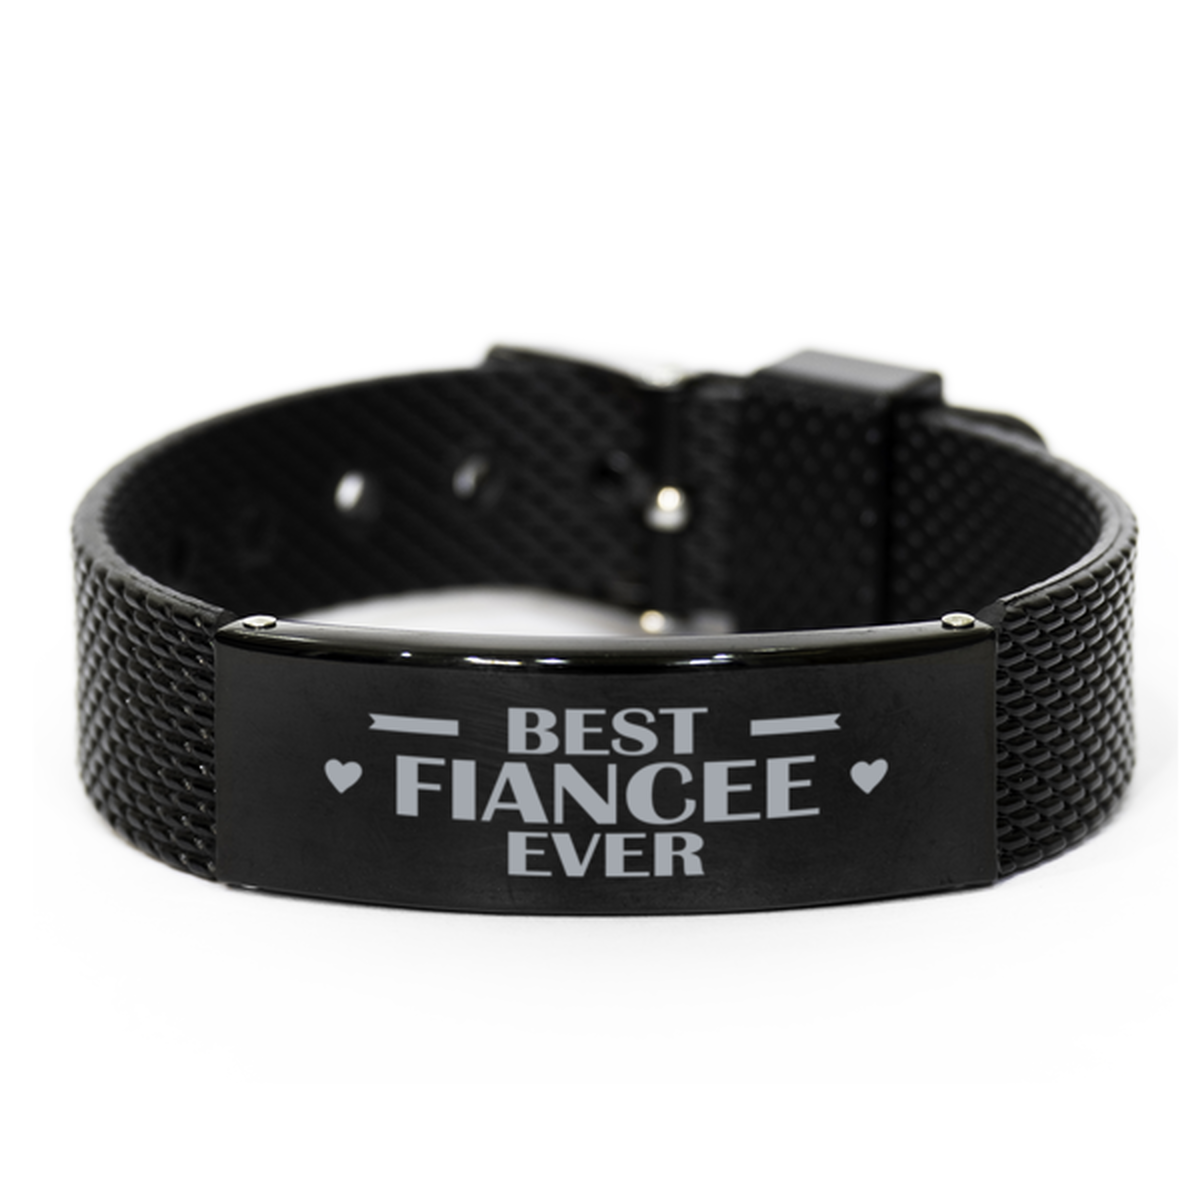 Best Fiancee Ever Fiancee Gifts, Gag Engraved Bracelet For Fiancee, Best Family Gifts For Women